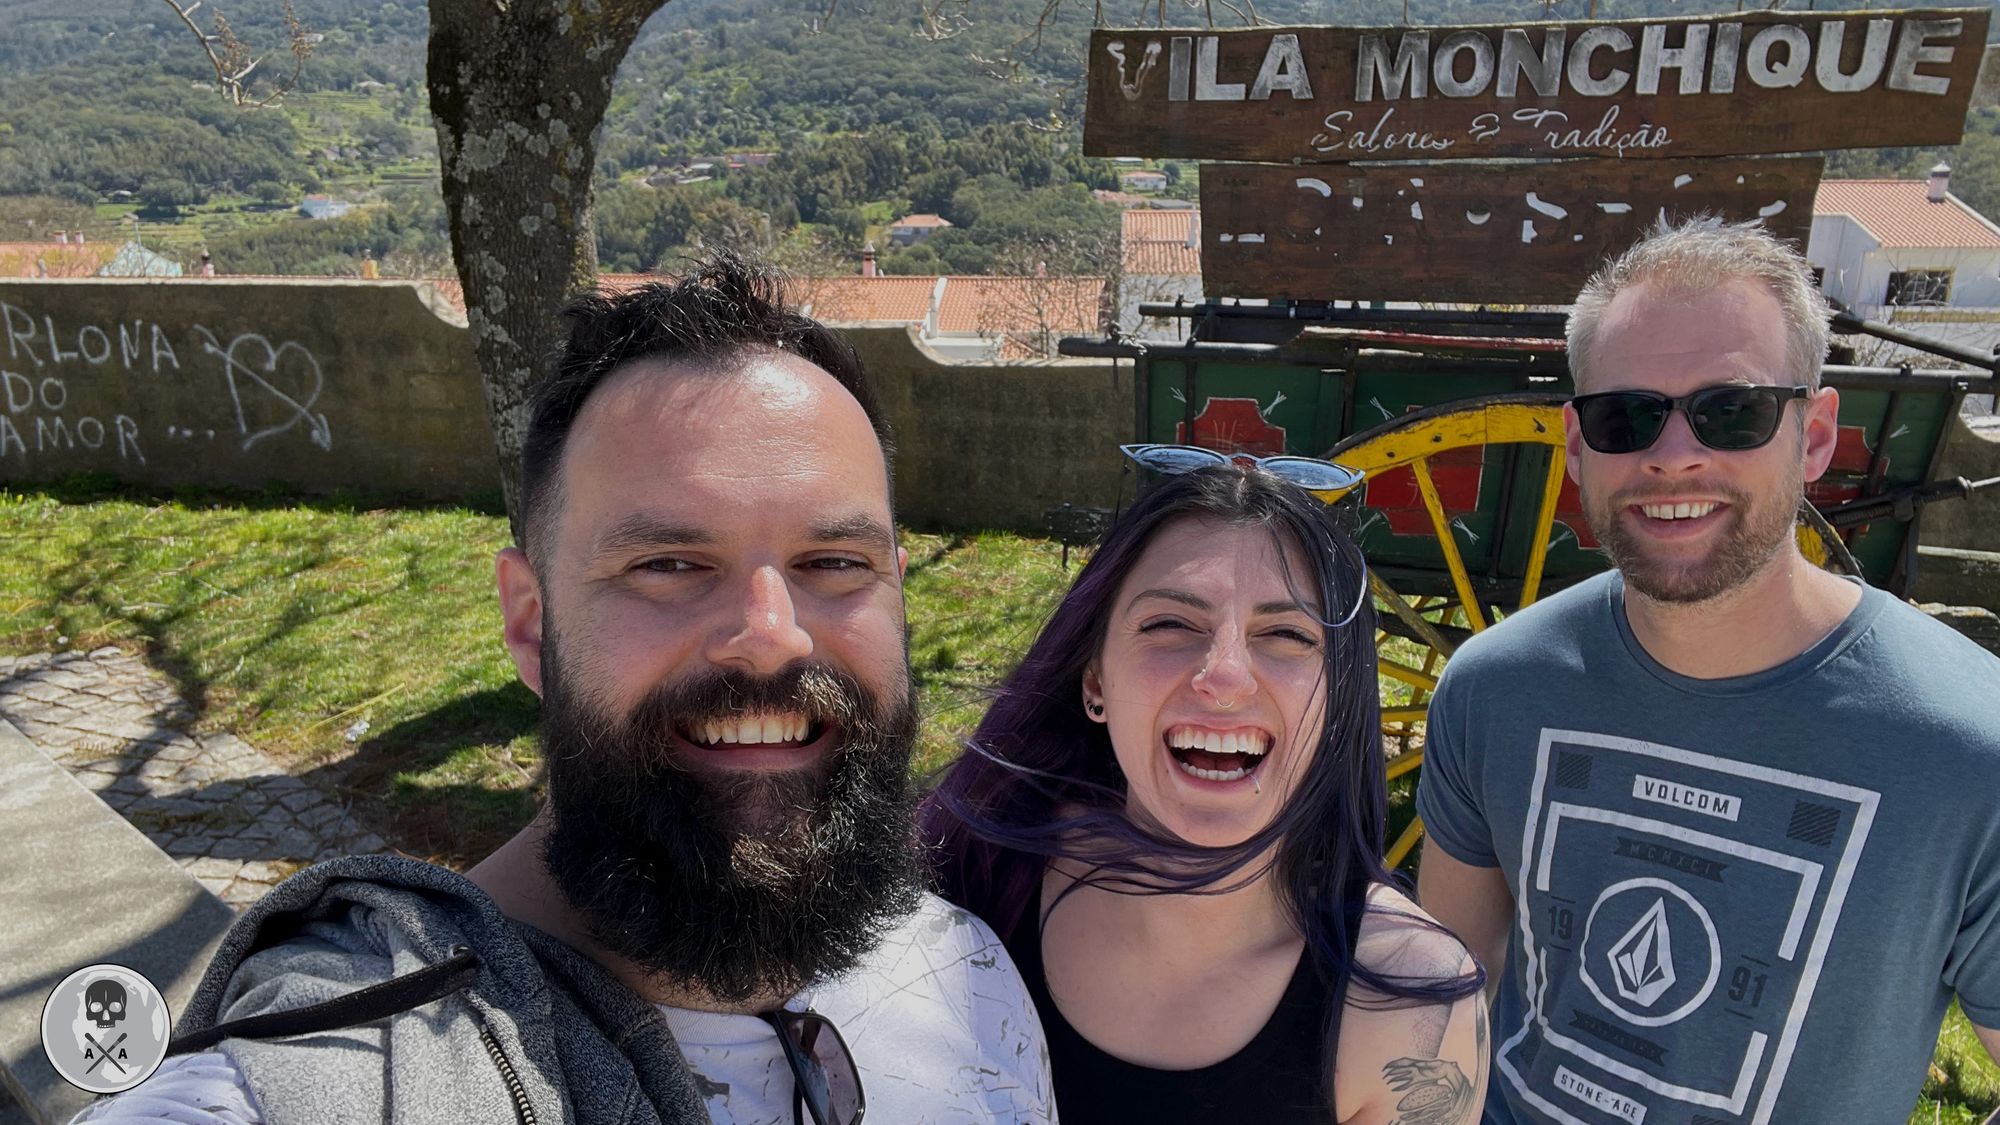 Alek, Alexia and Paul all smile in front of a Vila Monchique sign